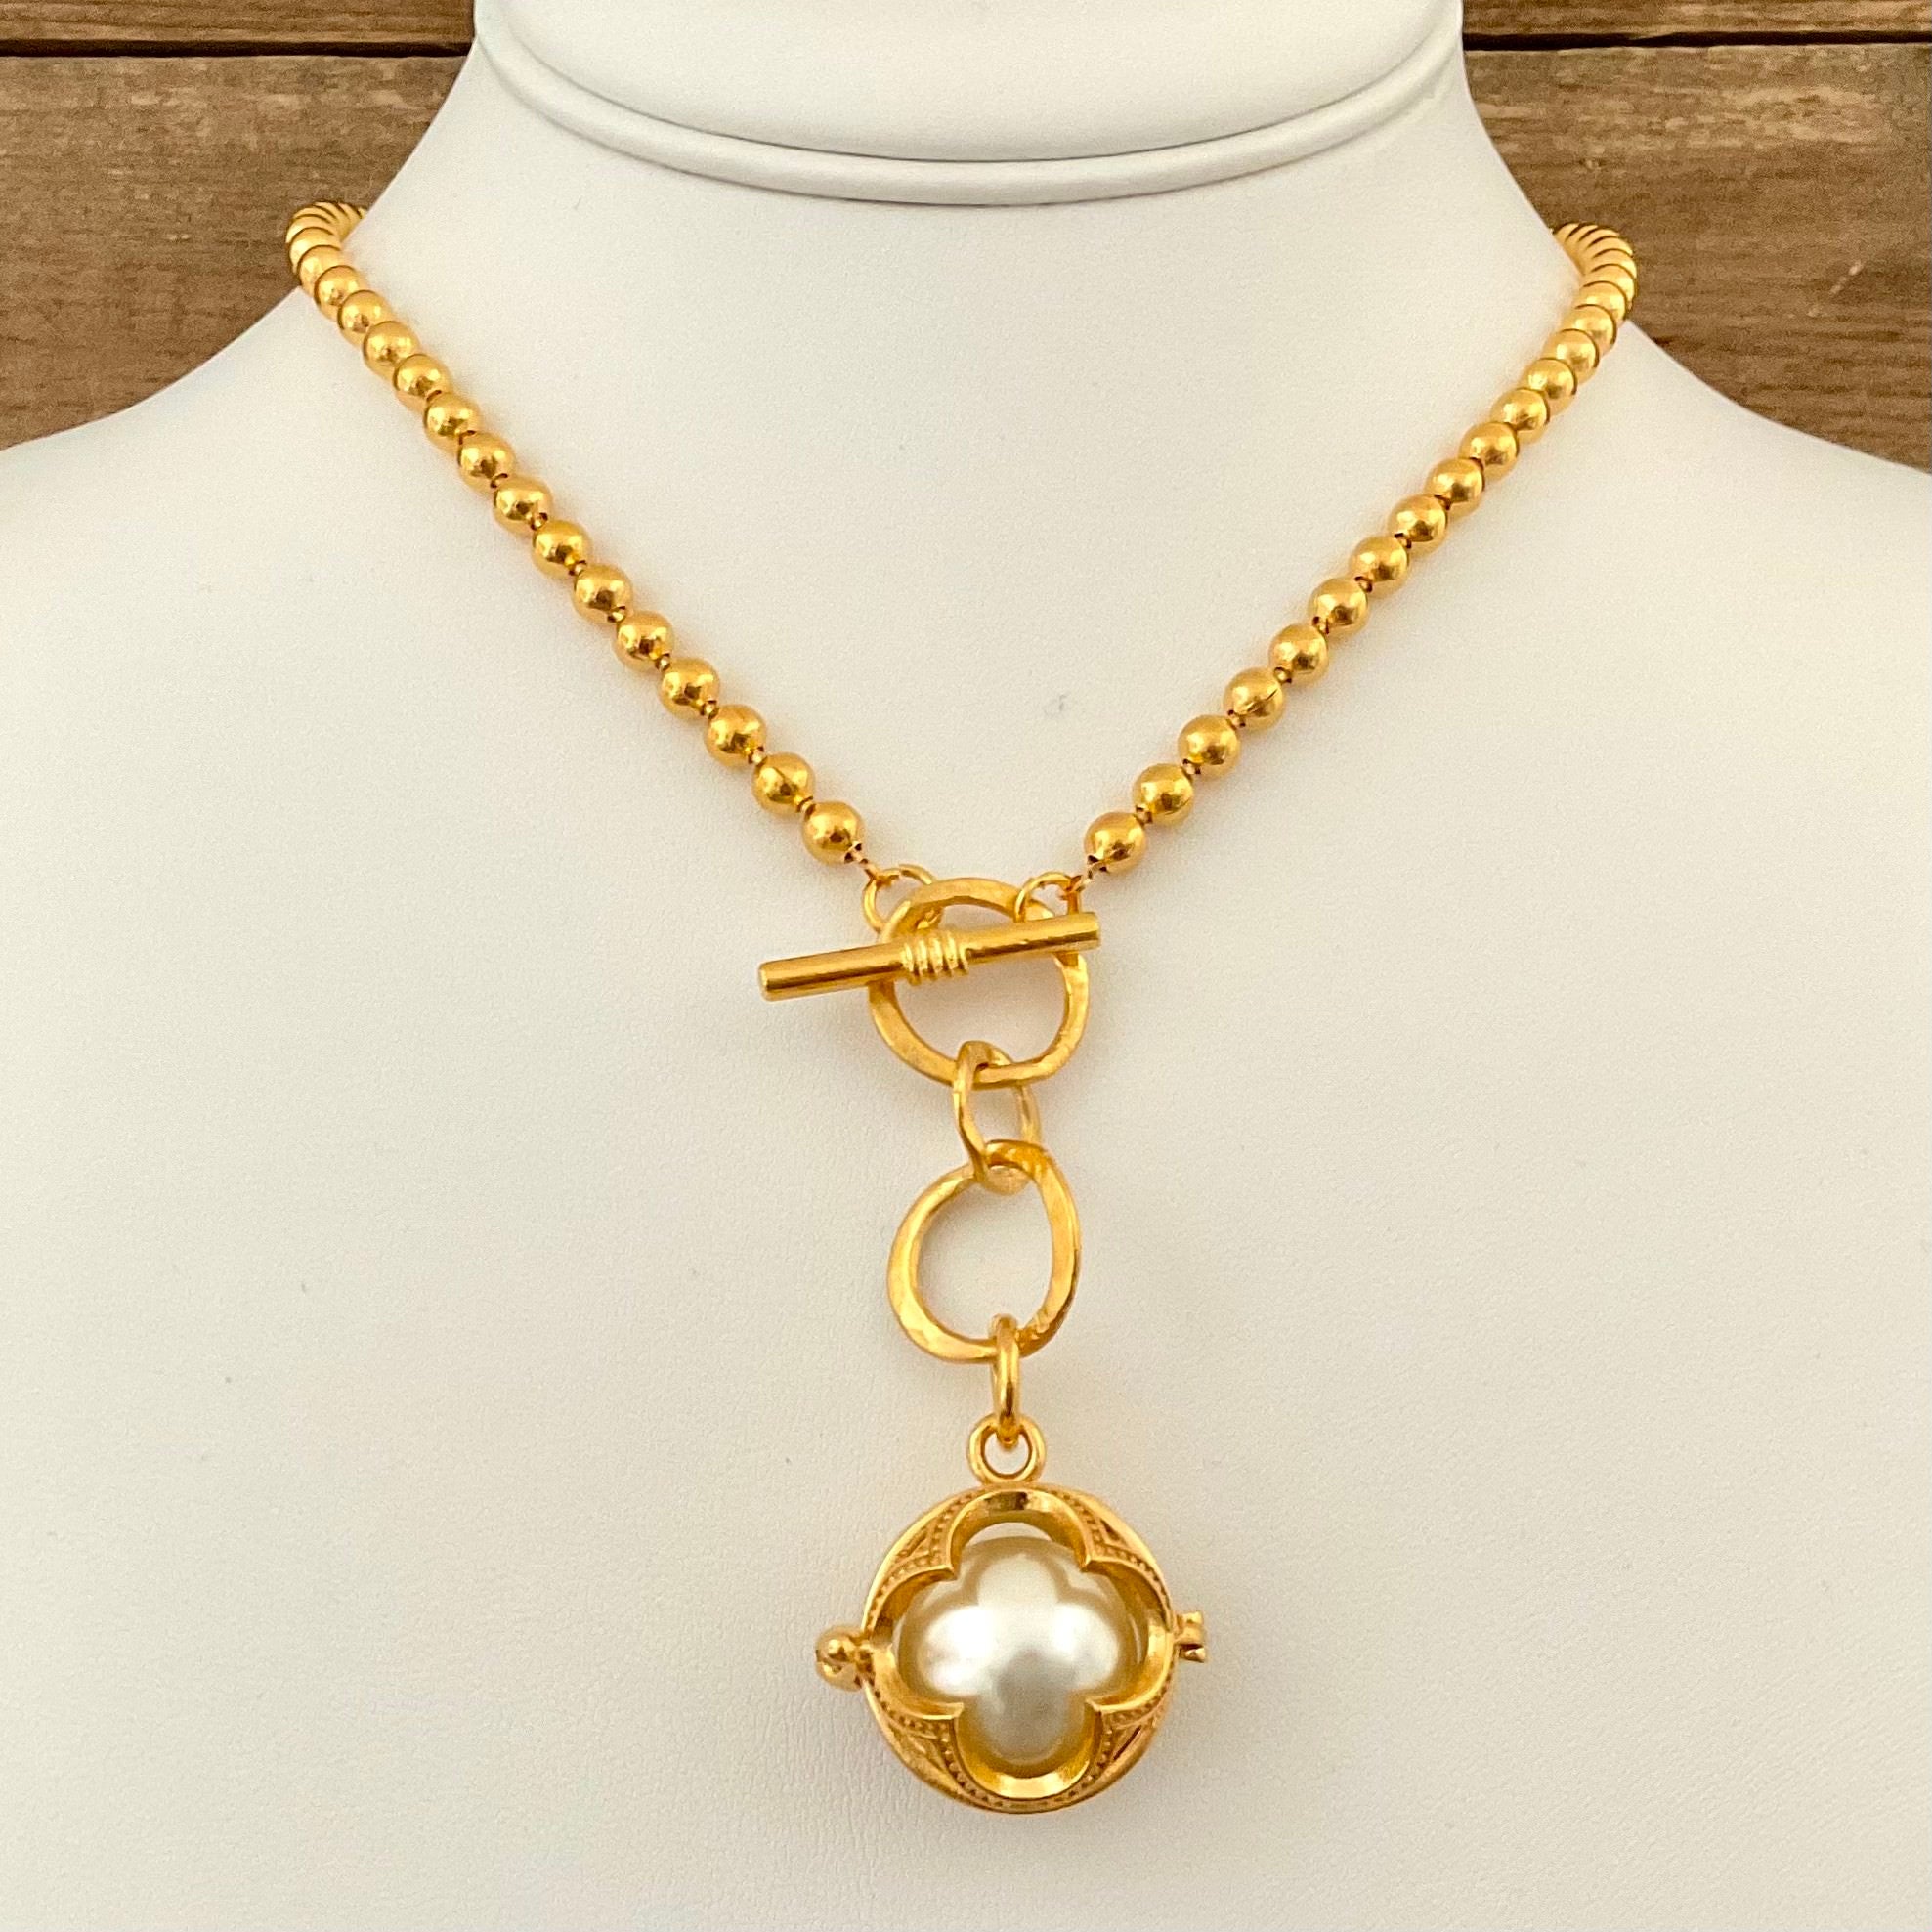 Vintage Gold Plated Chain with Pearl Pendant 18"